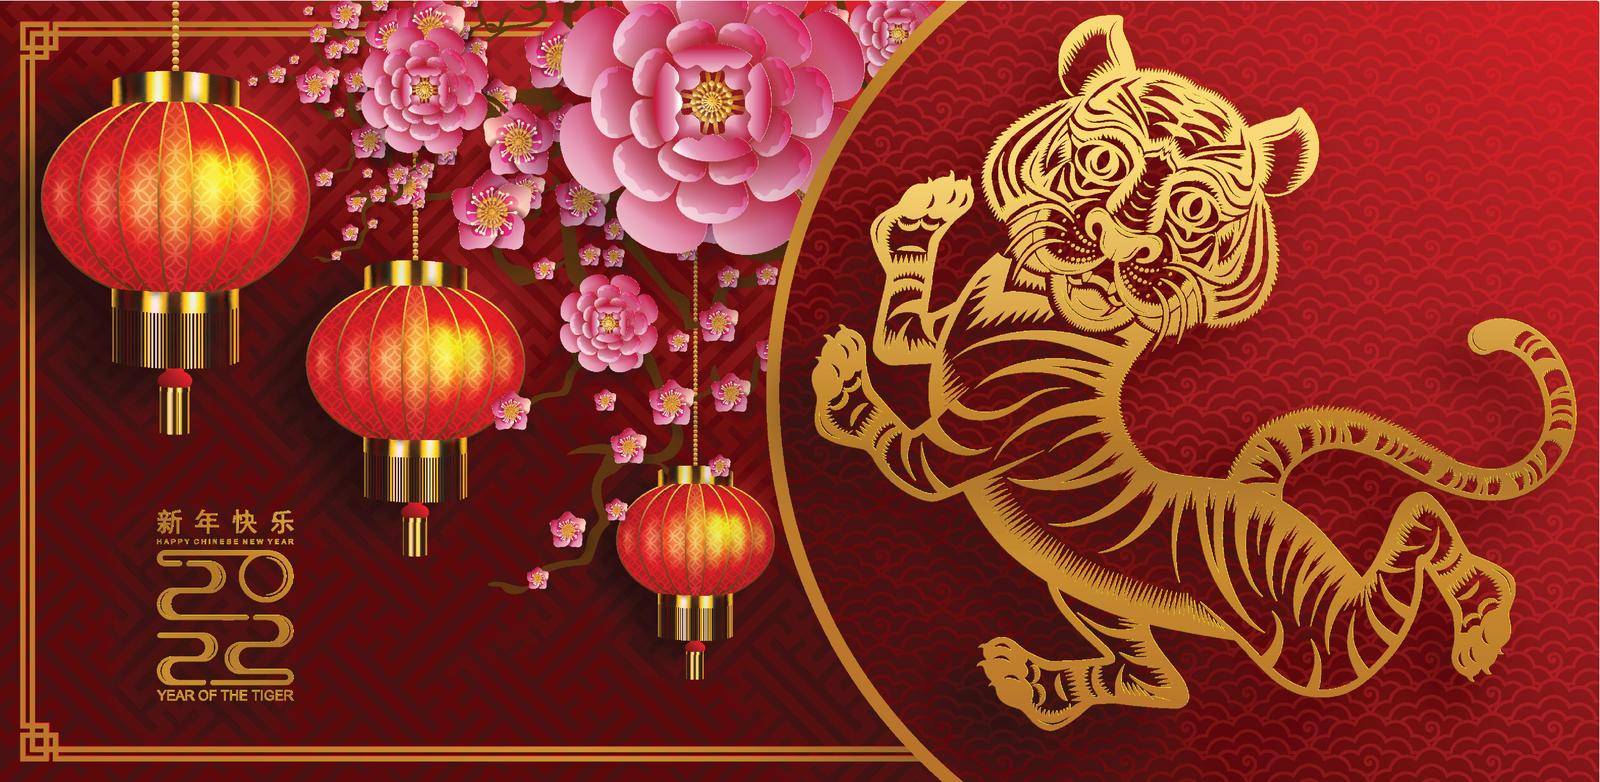 Happy chinese new year 2022 year of the tiger by SiamVector